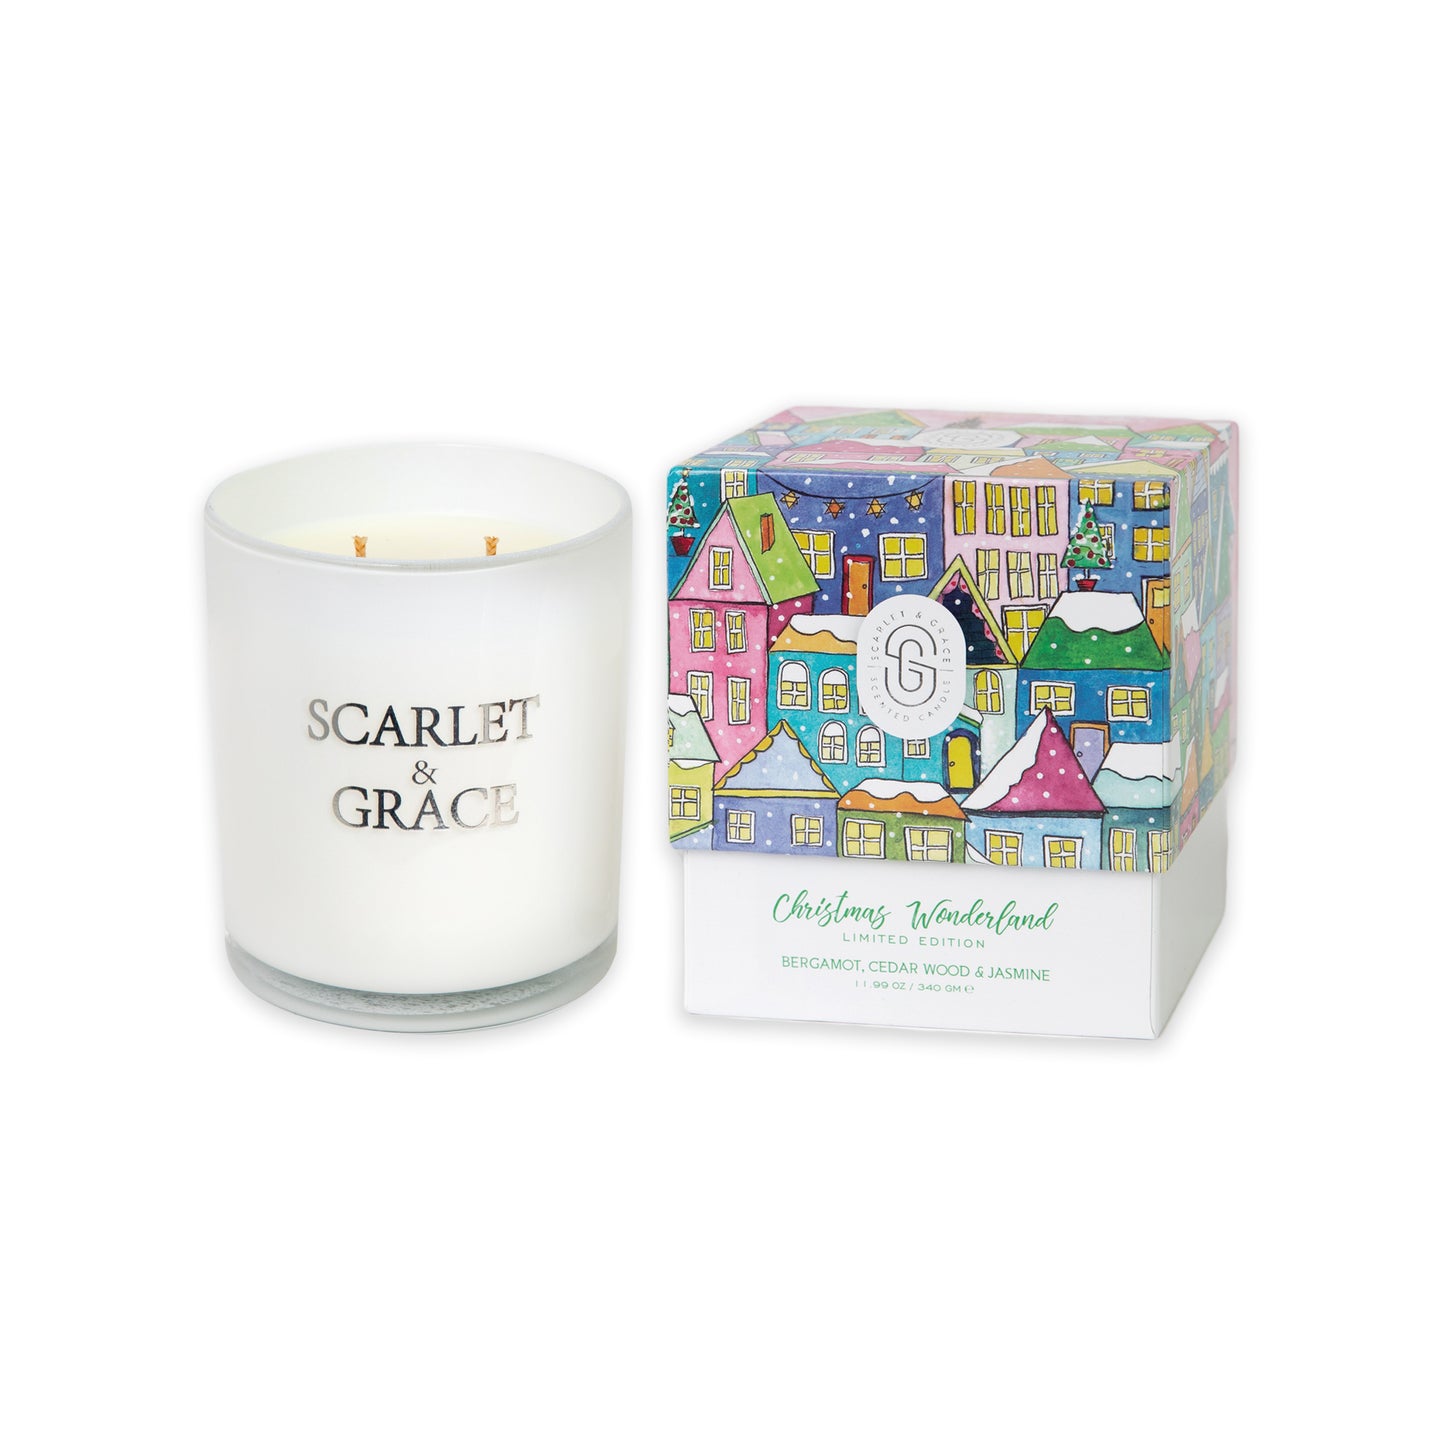 Christmas Wonderland - 340Gm Soy wax candle (Pre order - available from 15th of October) - Scarlet & Grace